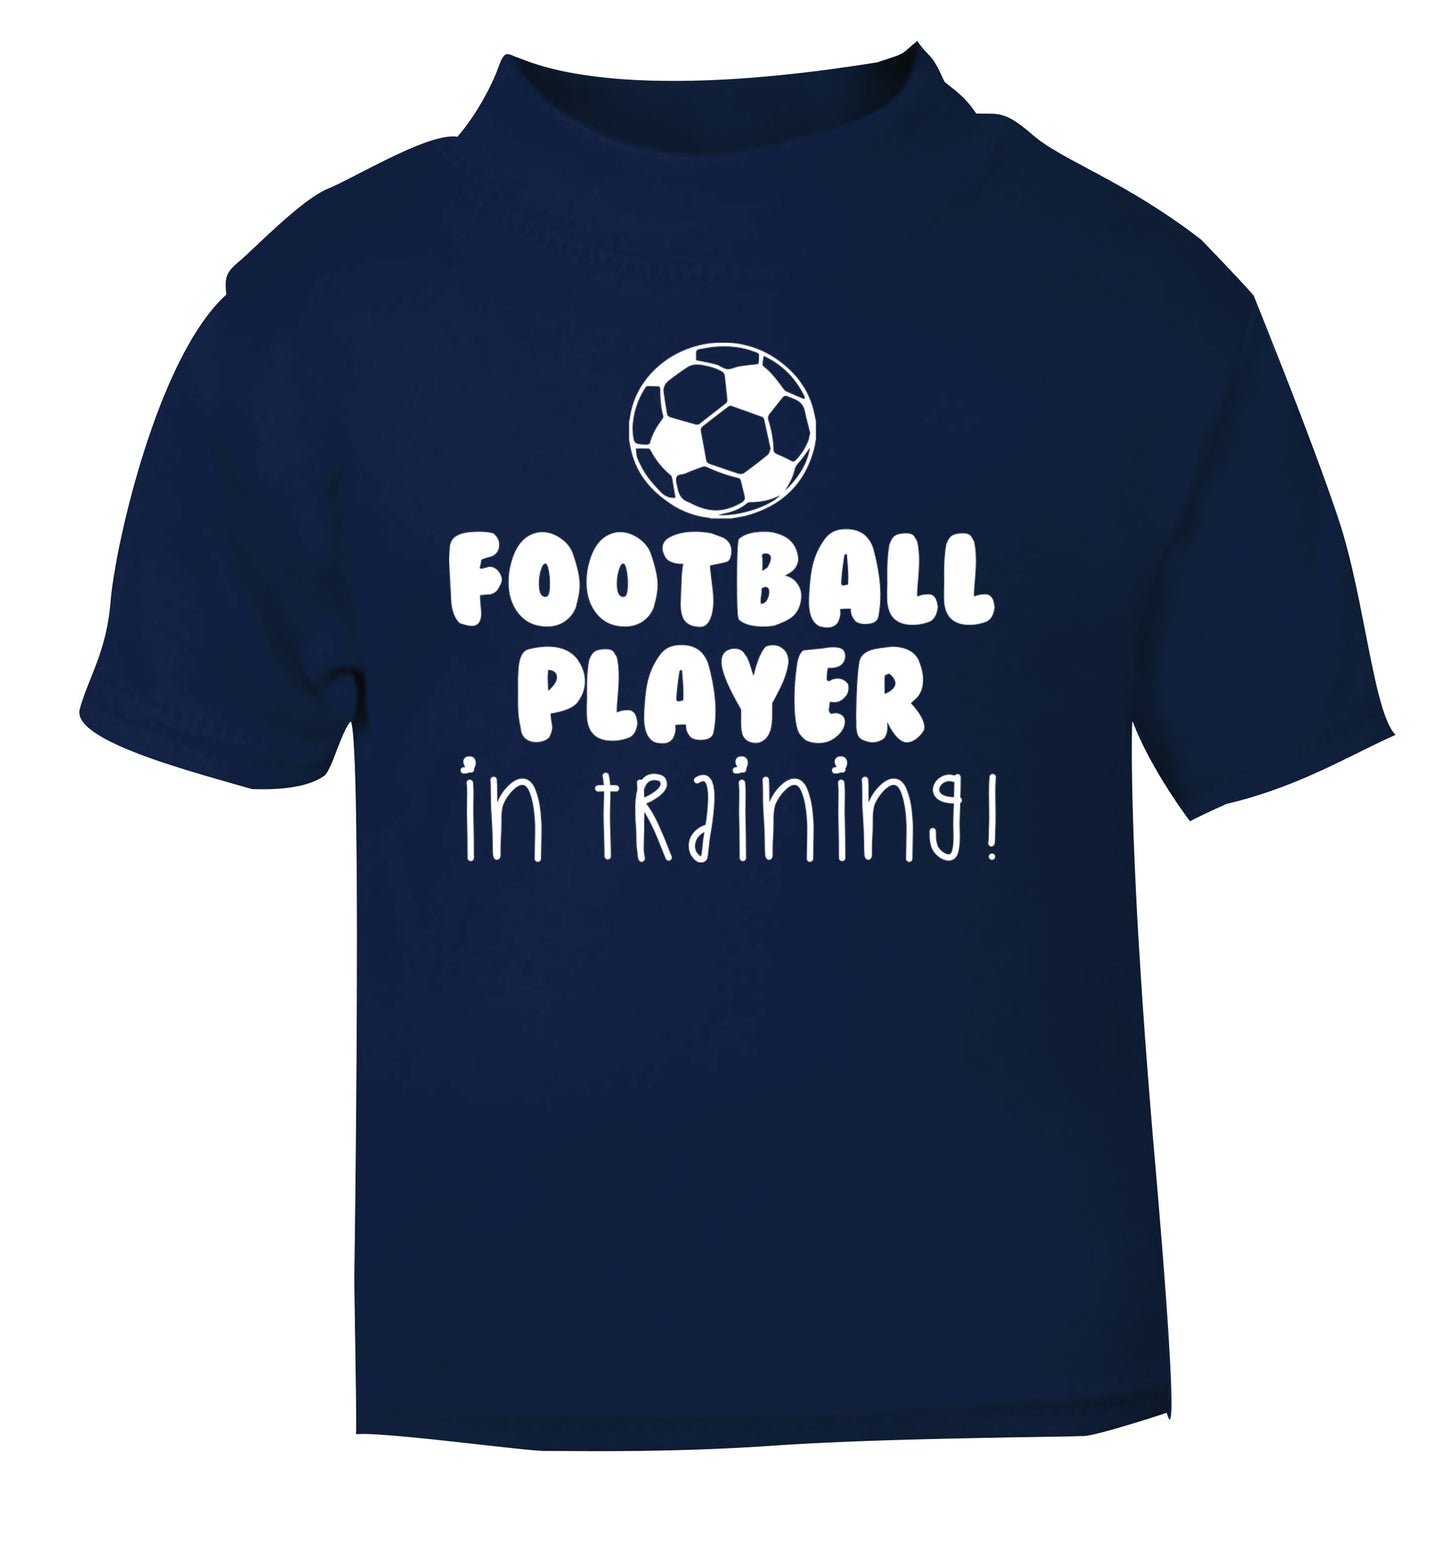 Football player in training navy Baby Toddler Tshirt 2 Years